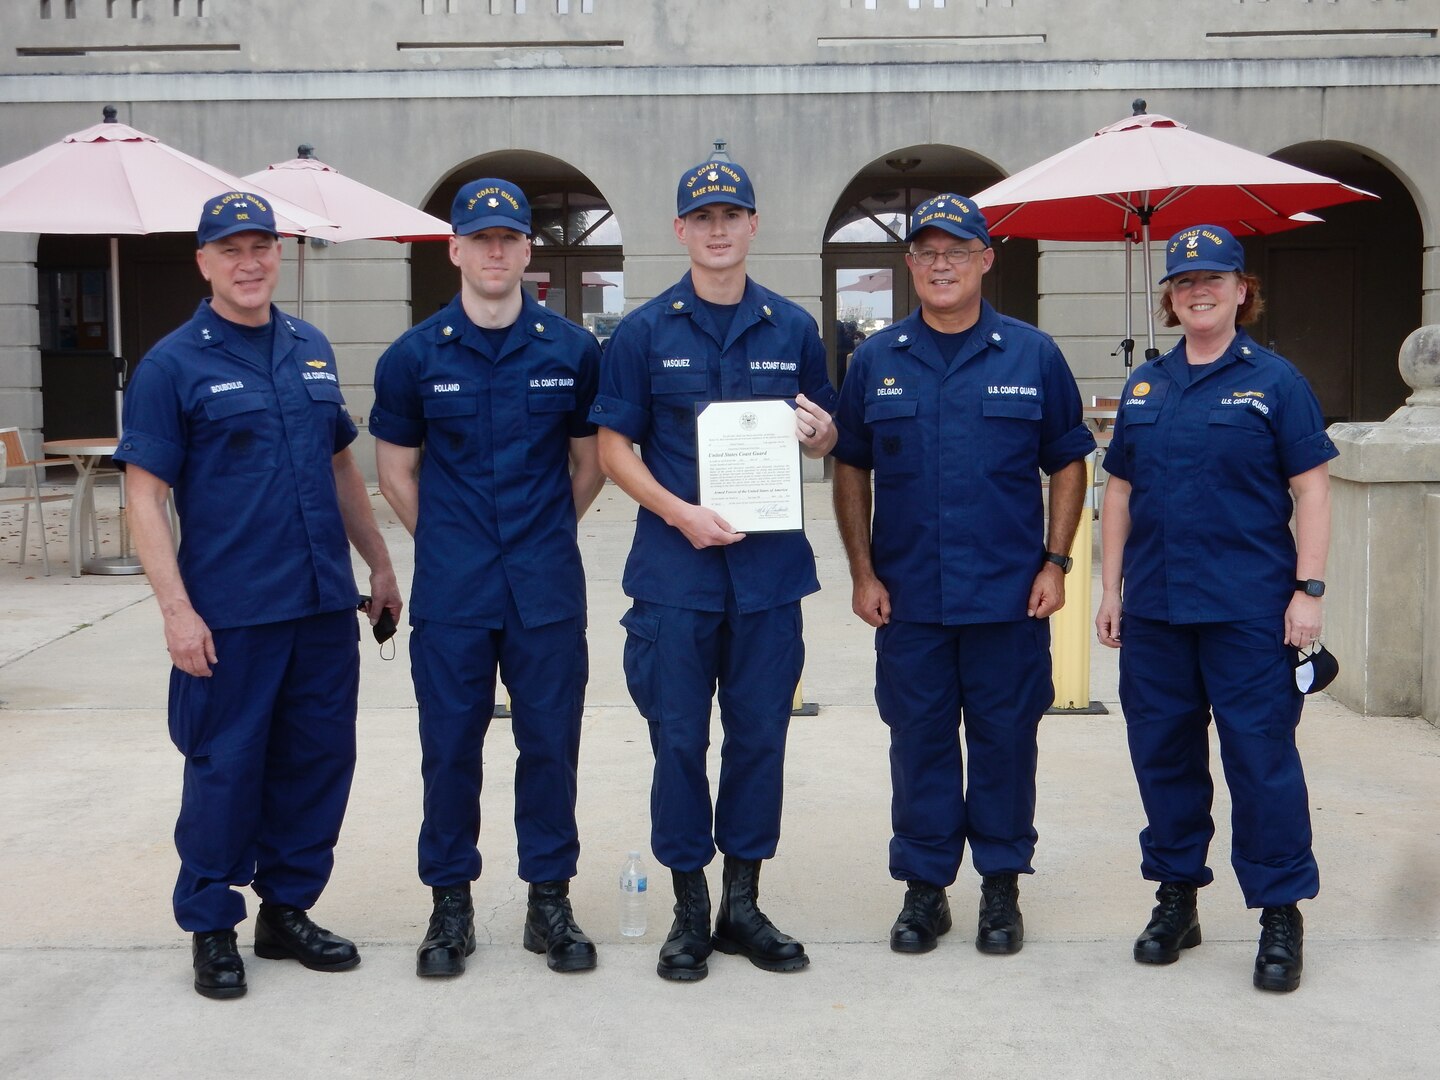 Rear Adm. Mel Bouboulis,left, meritoriously advanced Adrian Vazquez (center) to electronics technician first class, March 15, 2021. Pictured from left to right: Rear Adm. Mel Bouboulis Petty Officer 2nd Class Jacob Polland; Petty Officer 1st Class Class Adrian Vazquez; Cmdr. Javier Delgado; and Master Chief Petty Officer Ann Logan.(U.S. Coast Guard photo)